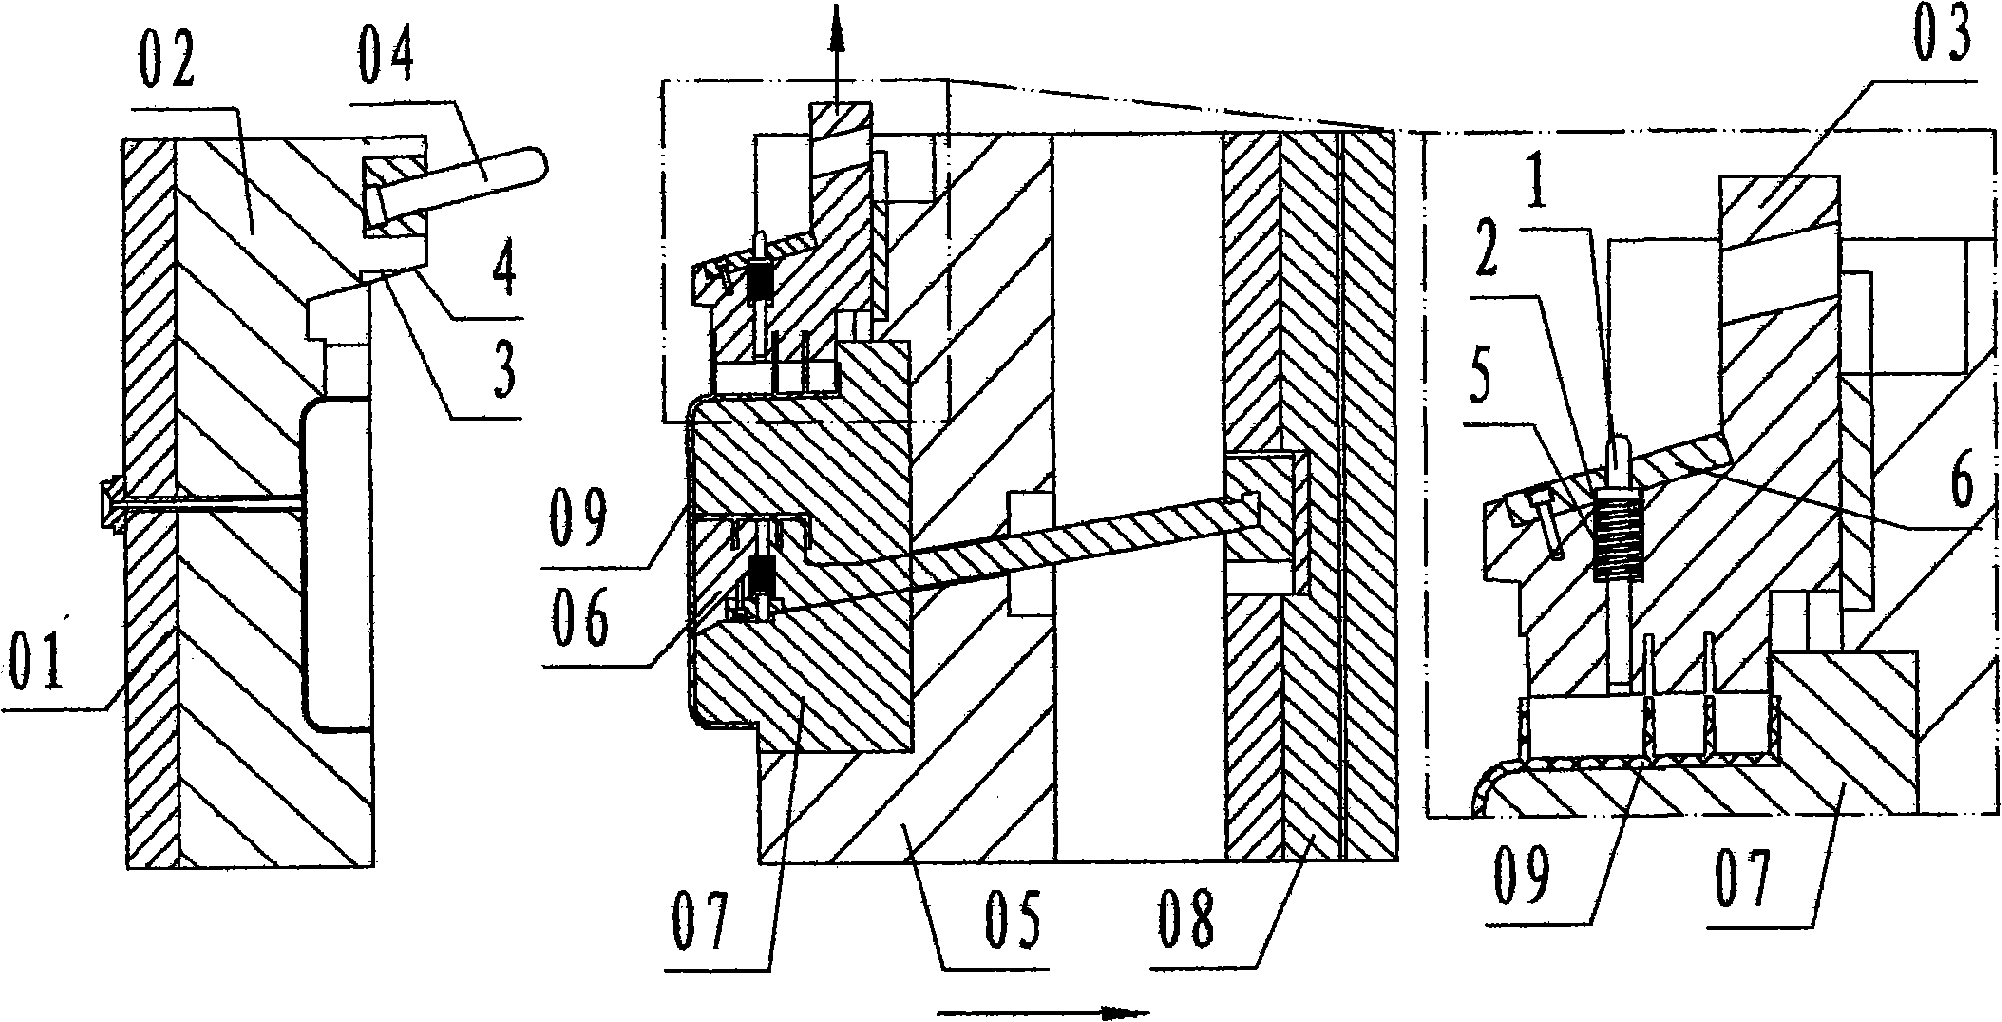 Time-delay drawing protection technical apparatus for injection mold slide block thimble and inclined jacking block thimble